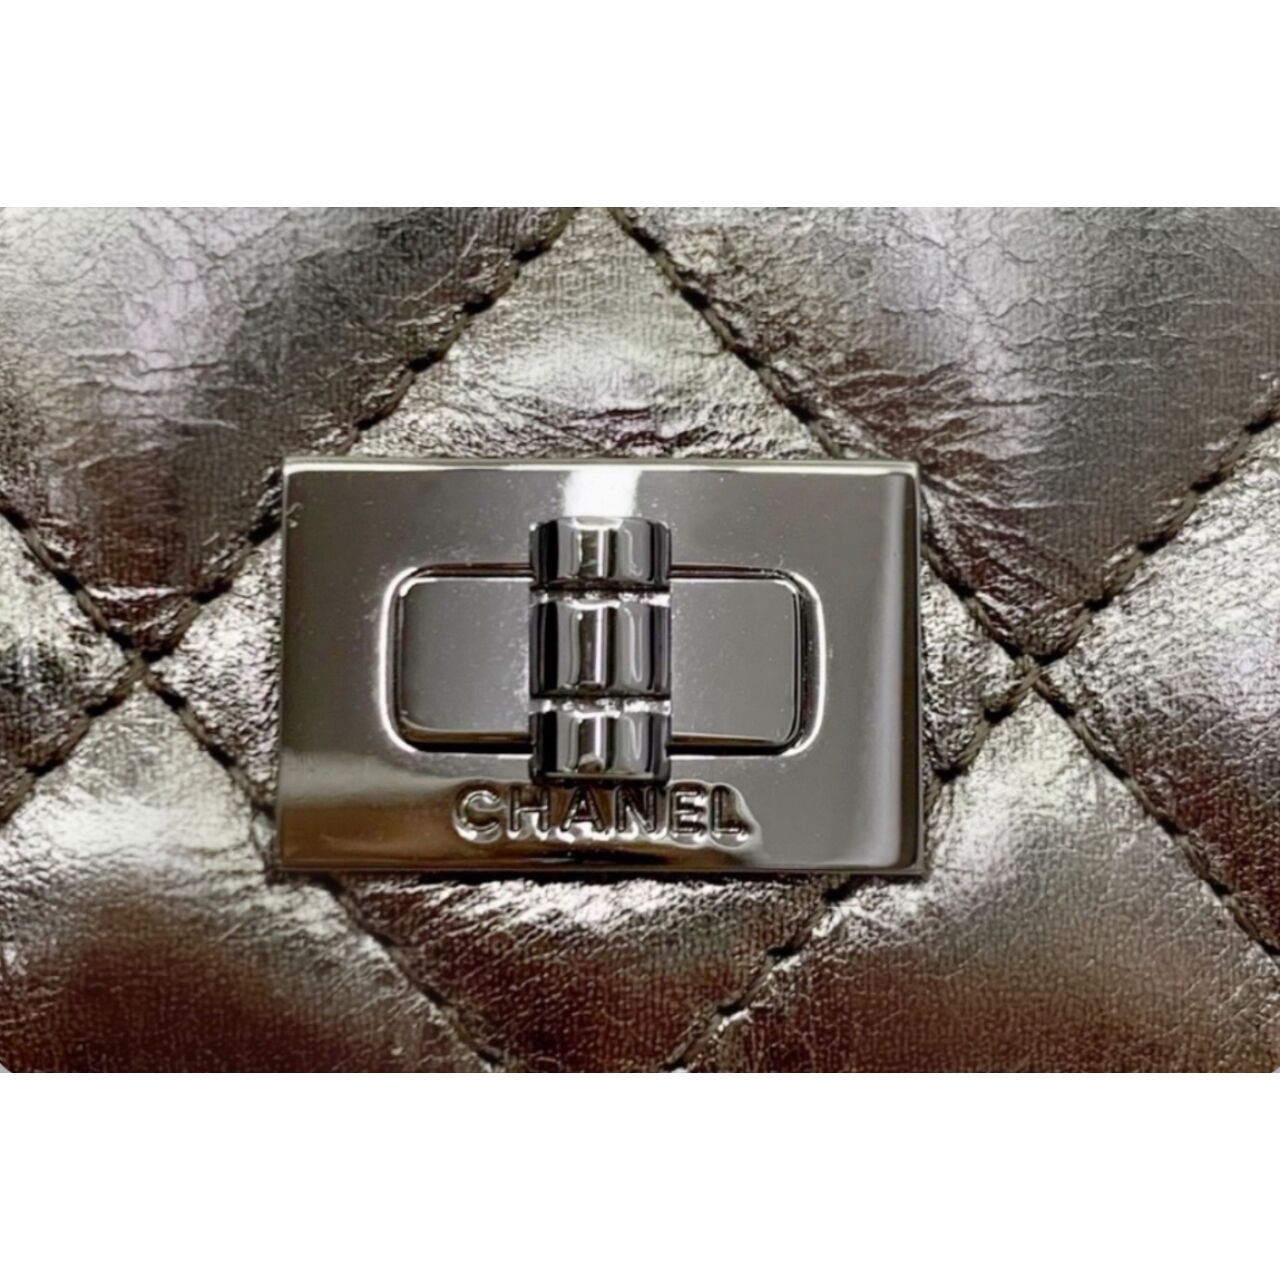 Chanel Silver Leather No.11 Wallet